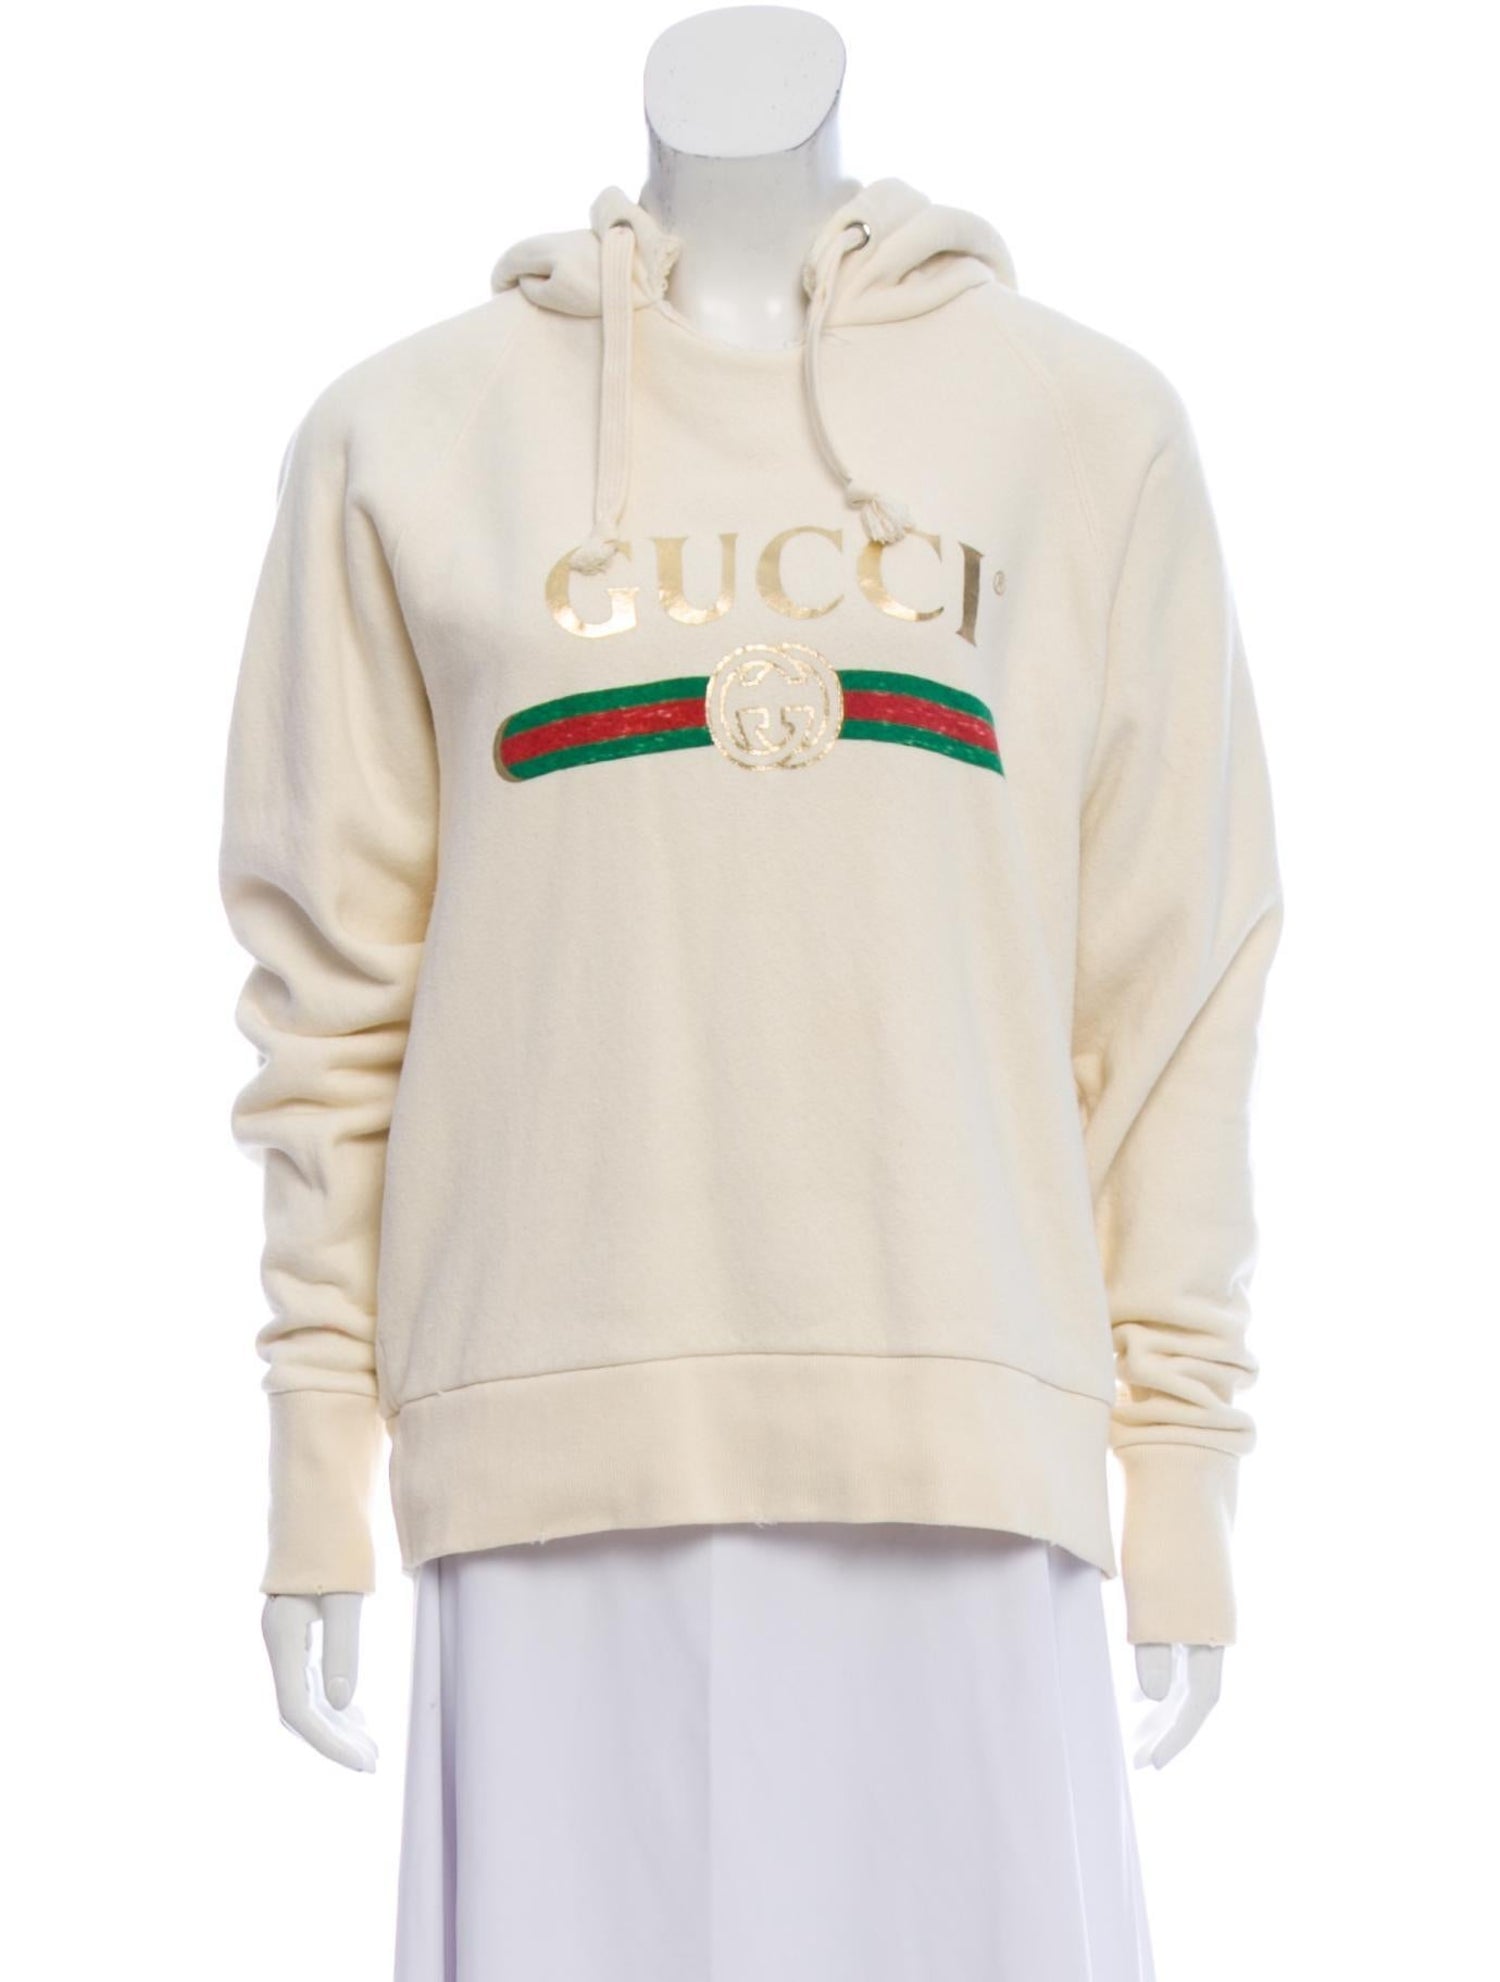 Gucci 'Blind For Love' Hoodie | Live Your Best Gucci Life These Vintage and Secondhand Bags, Shoes, Tees, and More | POPSUGAR Fashion Photo 16